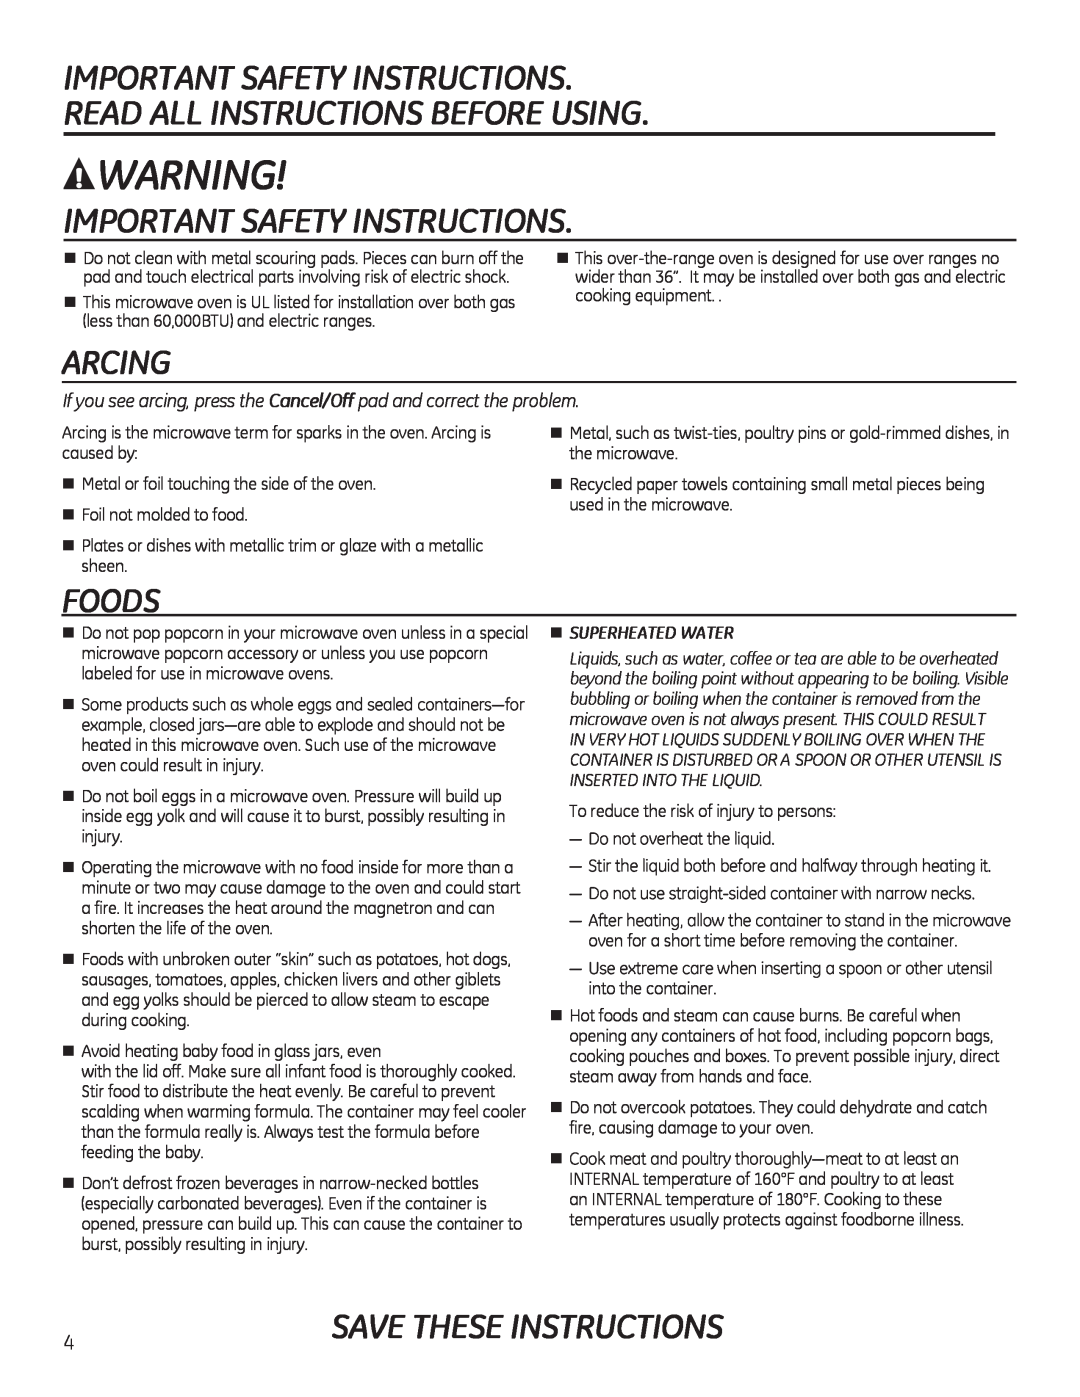 GE DVM7195, PVM9195, PNM9196 Arcing, Foods, Important Safety Instructions, Save These Instructions, „Superheated Water 